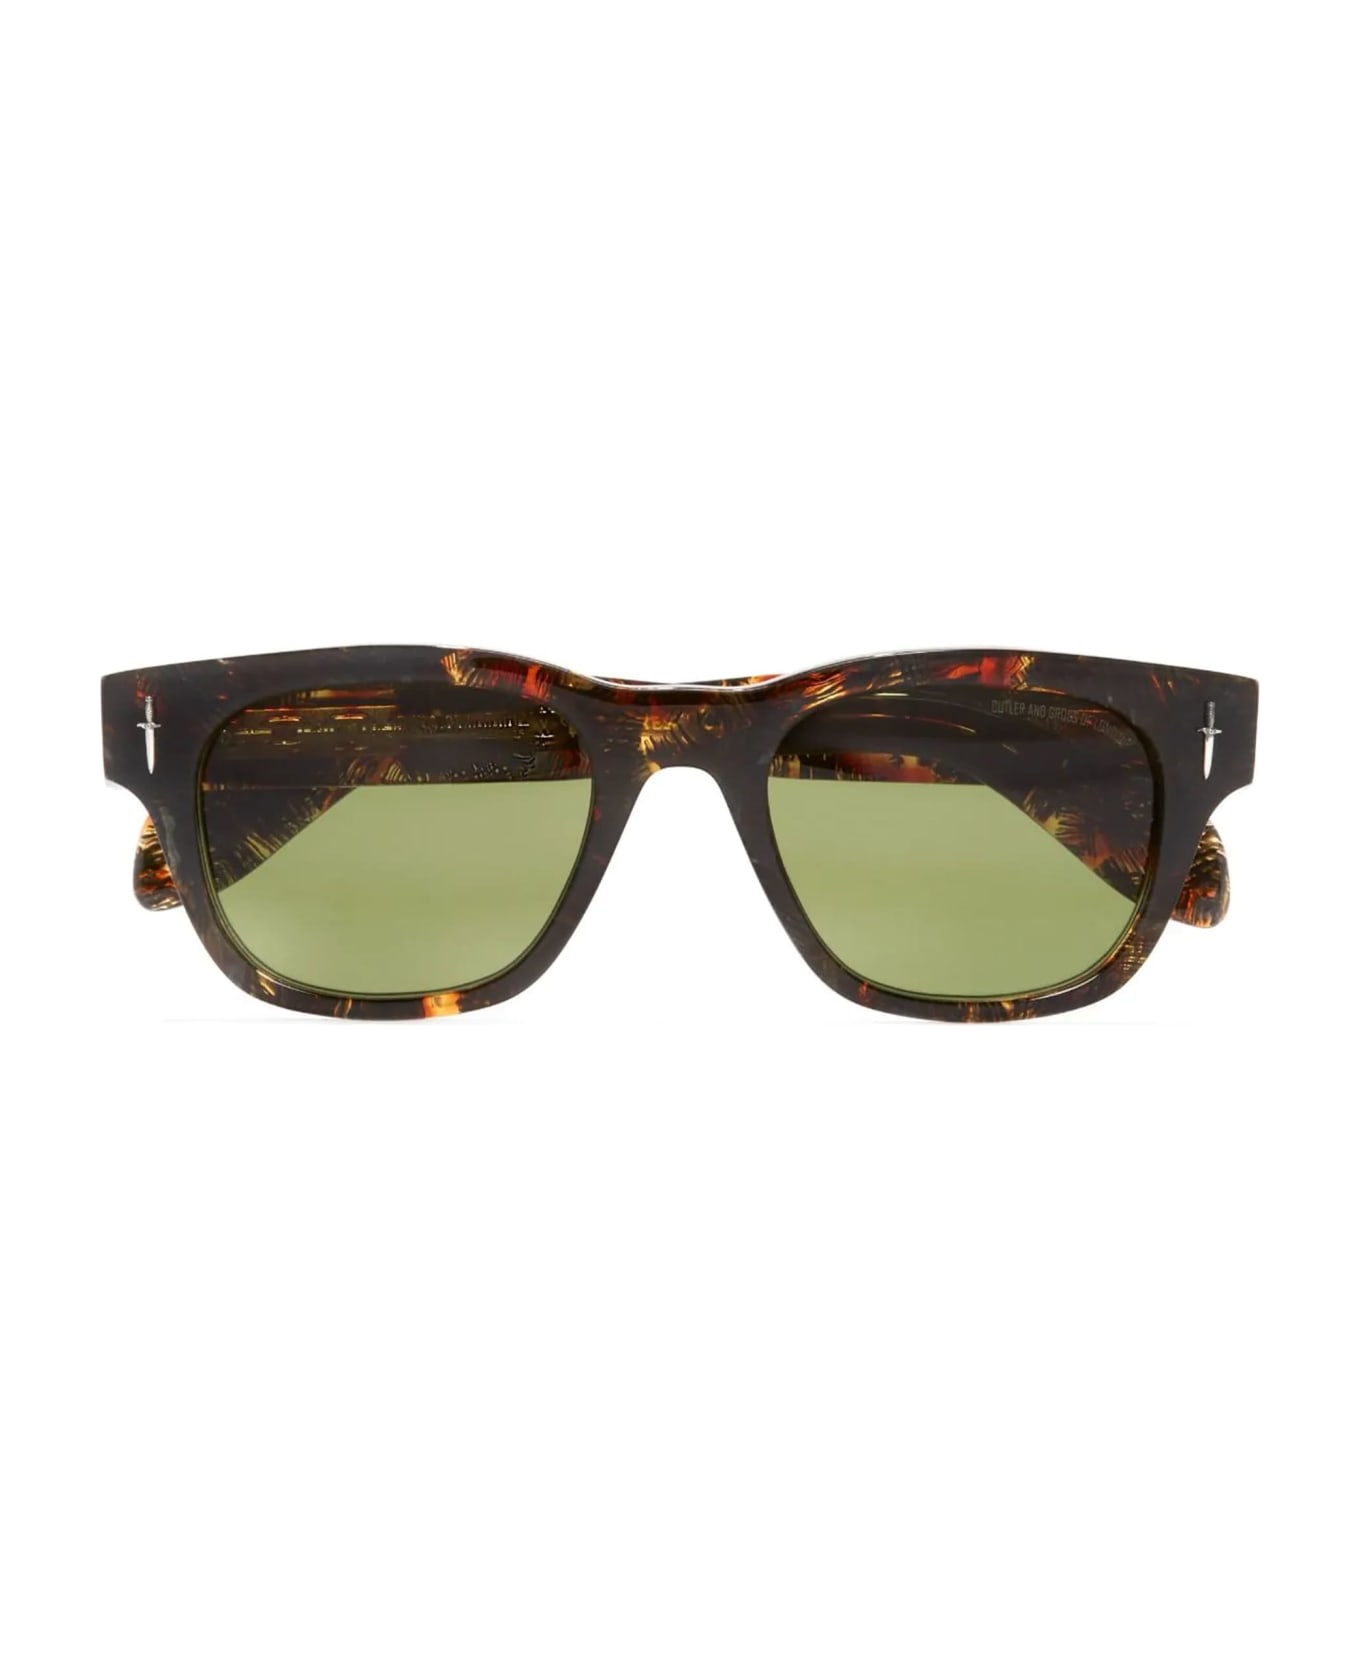 Cutler and Gross The Great Frog - Crossbones - Brush Stroke Sunglasses - brown